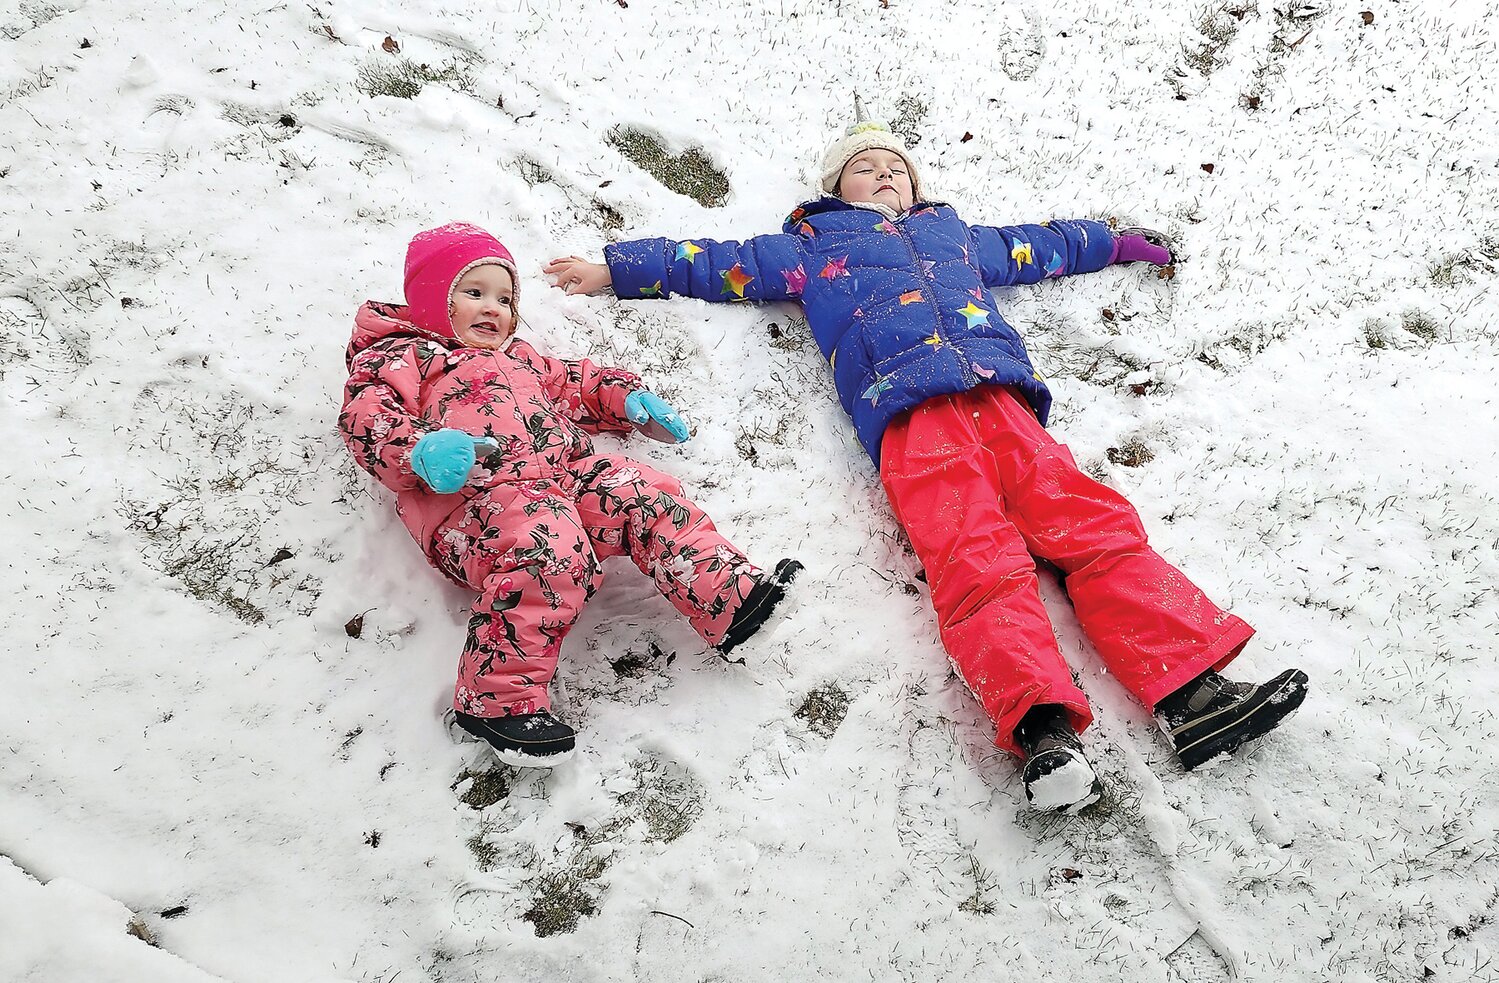 Mia and Baylee White, of Perkasie, found that a Jan. 6 storm dropped just enough of the white stuff to make snow angels.